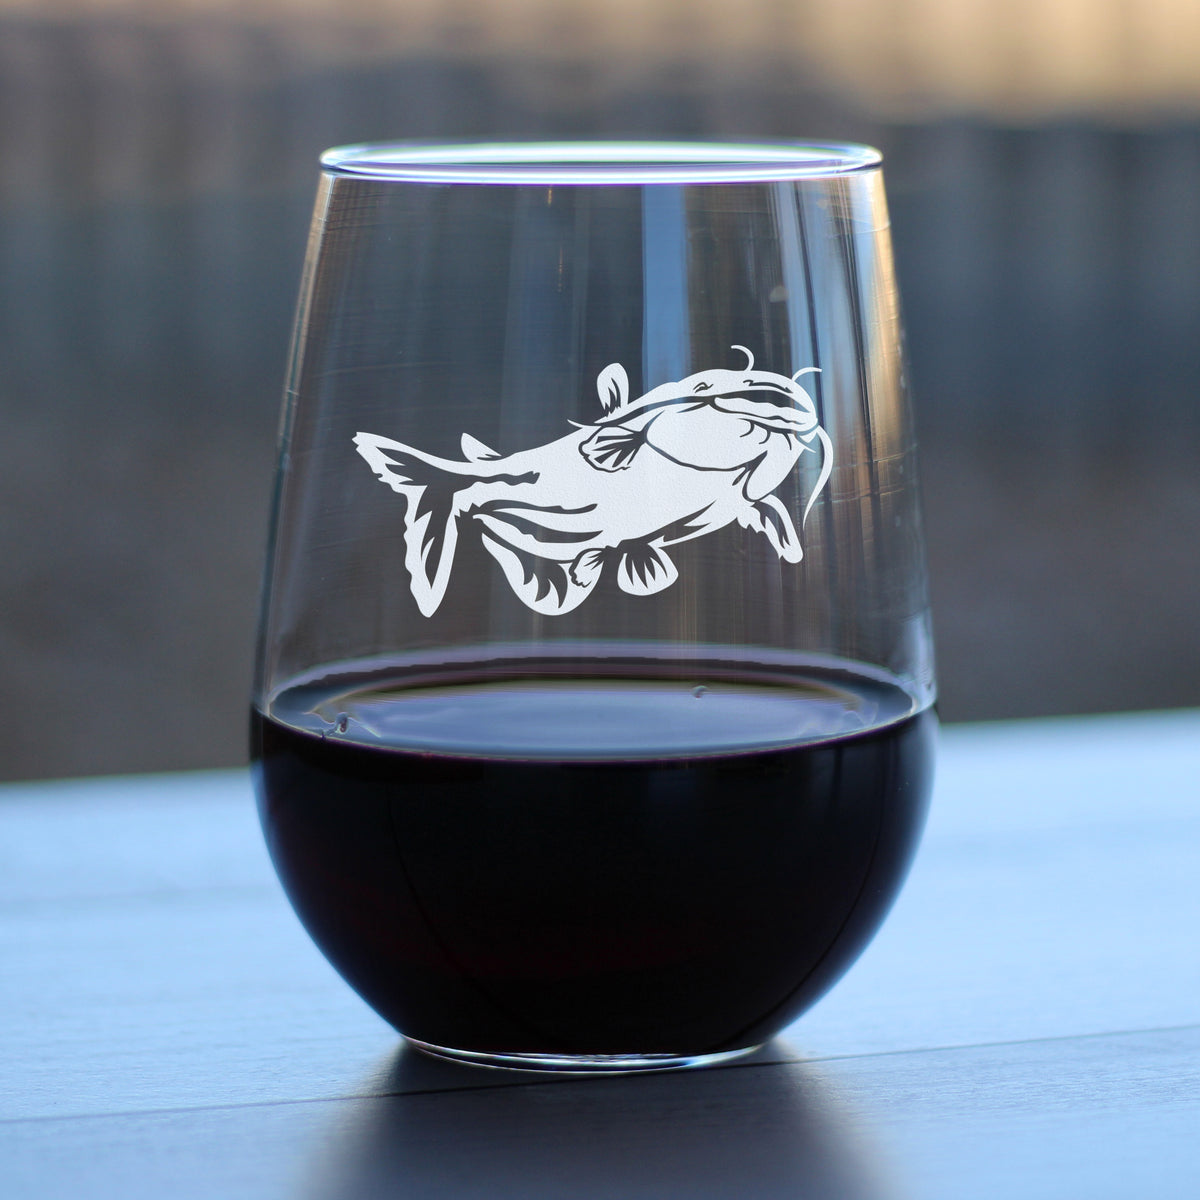 Catfish Stemless Wine Glass - Unique Fishing Themed Gifts for Fishermen - Large 17 oz Glasses